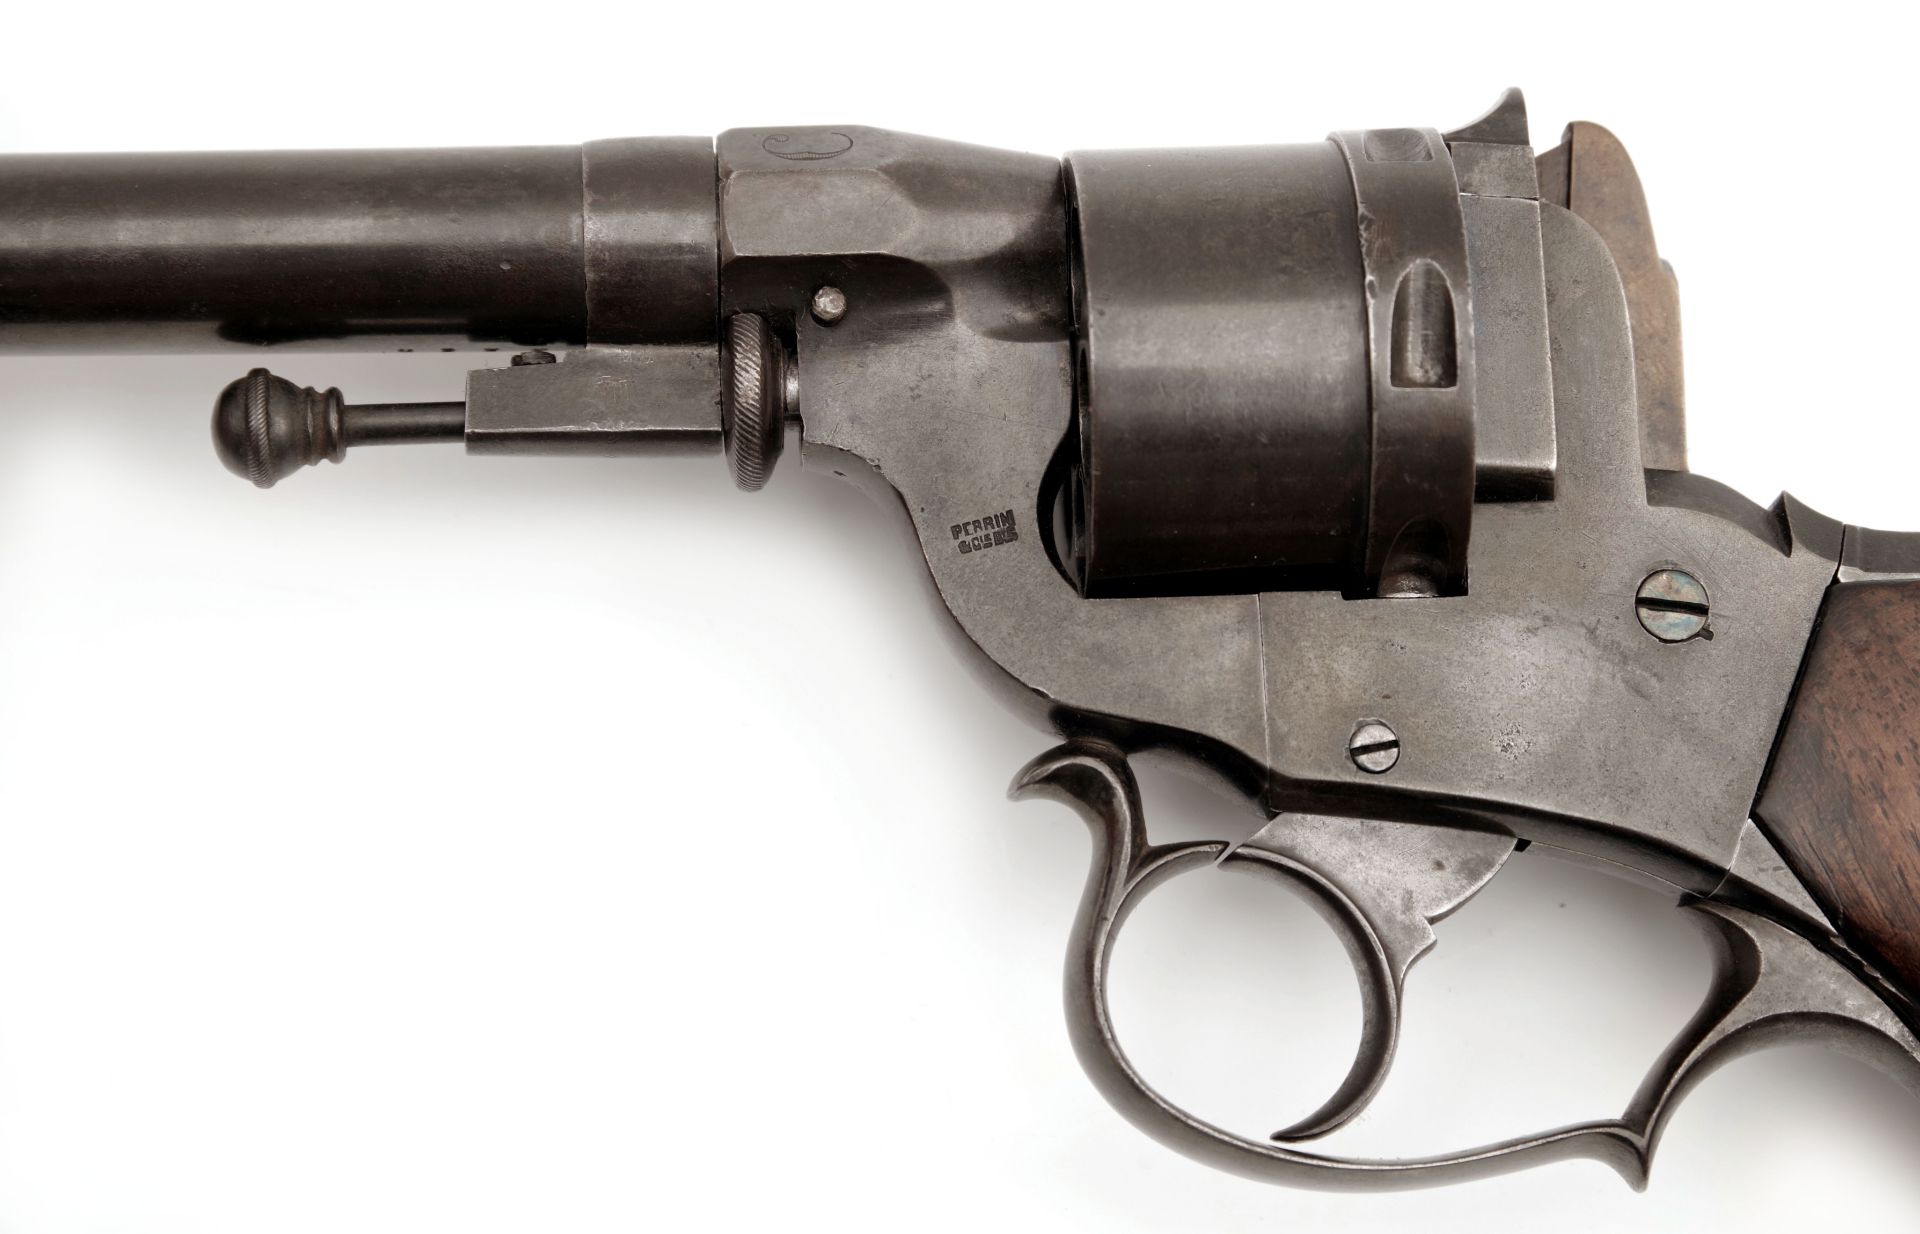 Double Action Revolver Perrin Model 1859 - Image 3 of 5